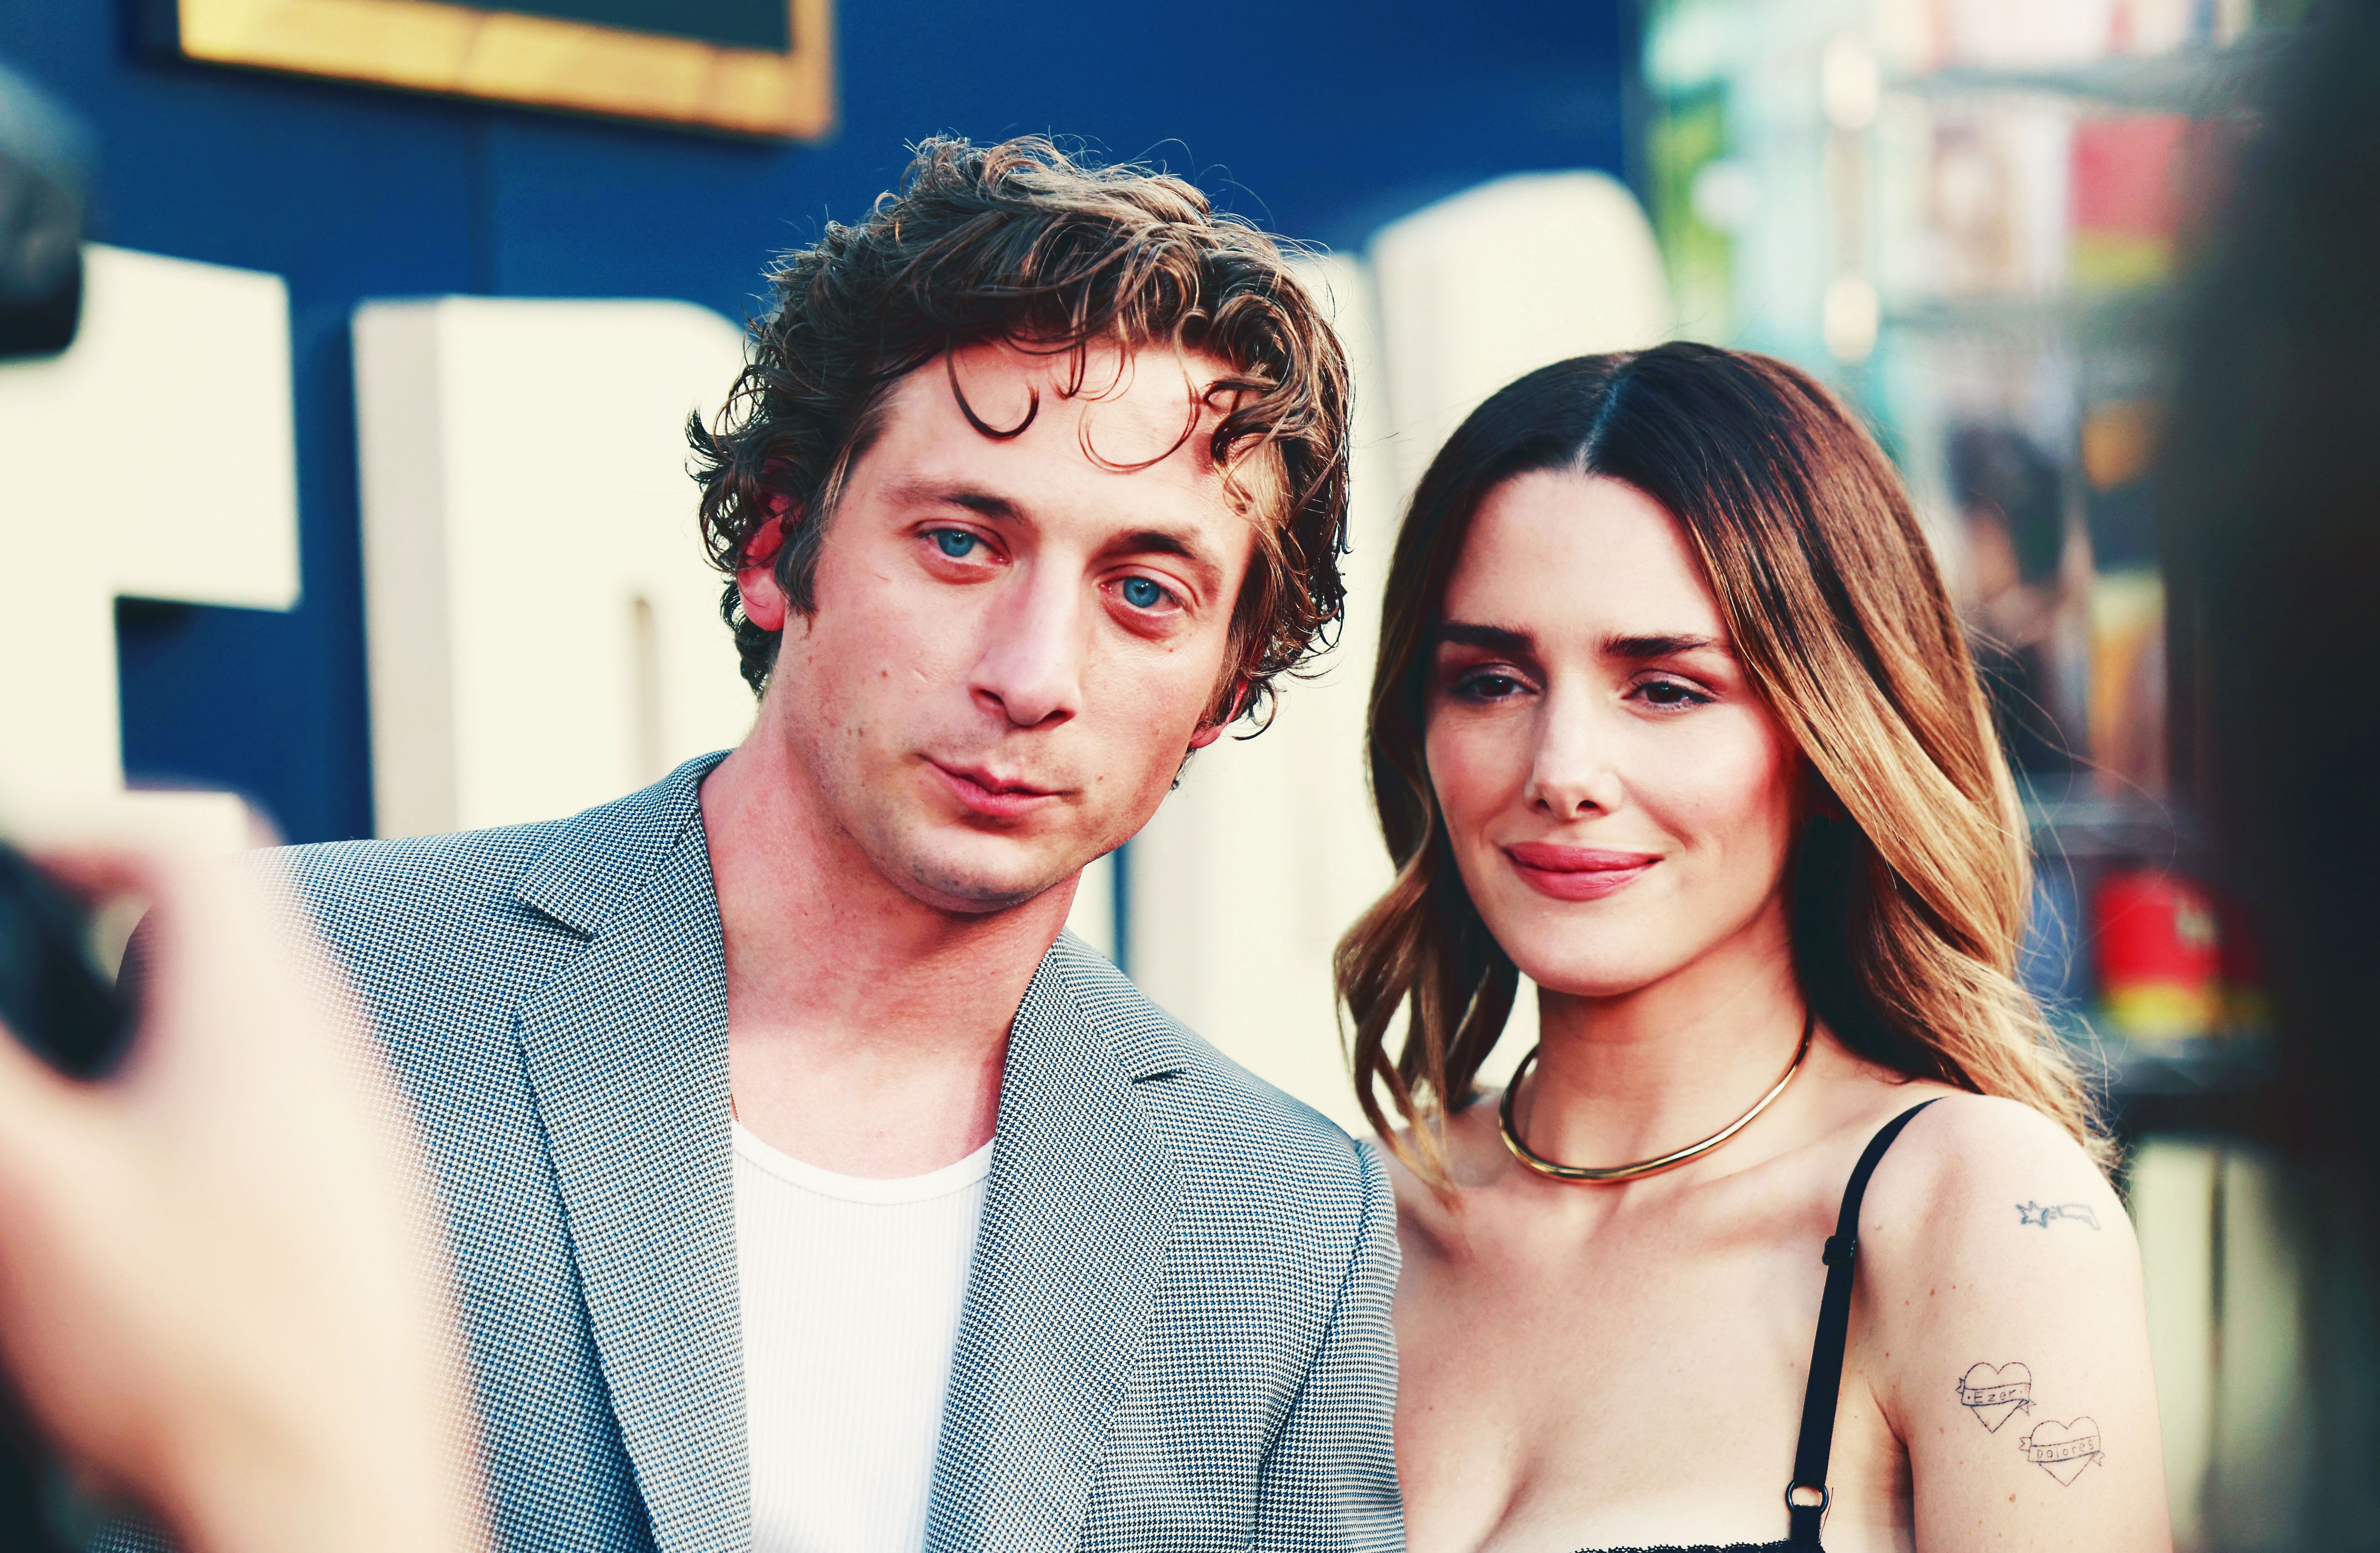 Jeremy Allen White and Addison Timlin Are Getting Divorced pic